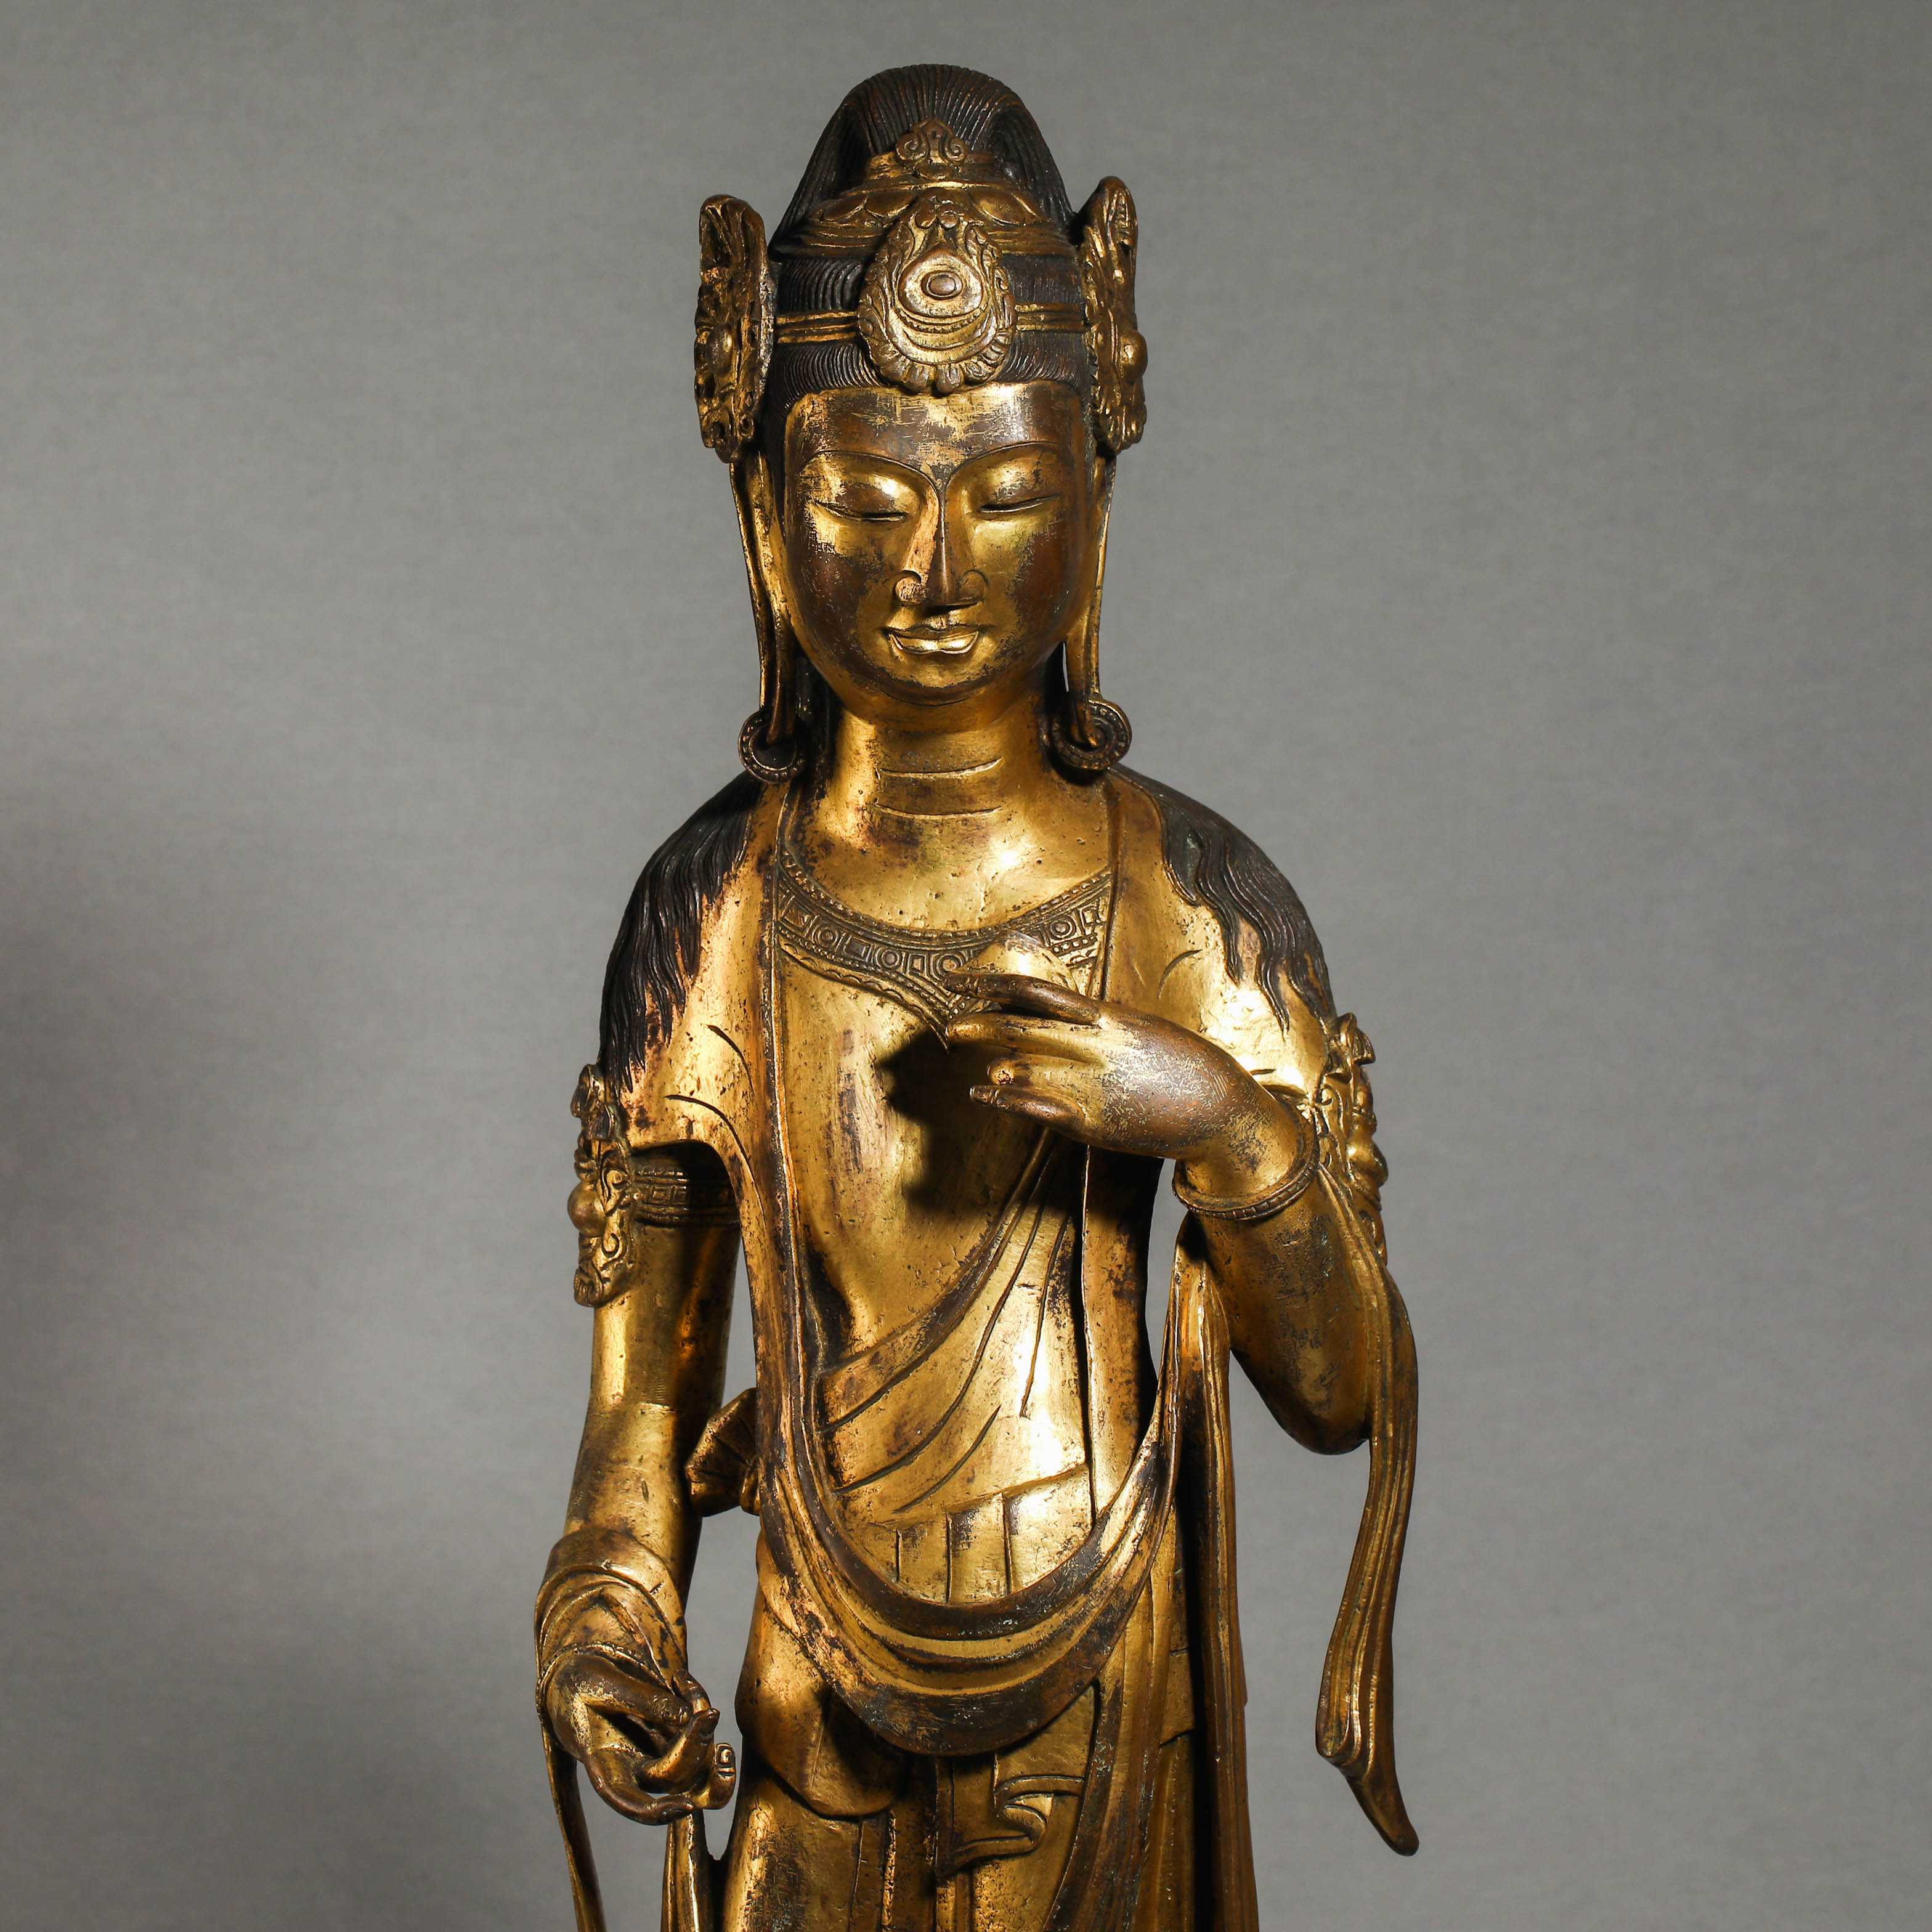 10th century gilded statue of Guanyin Buddha - Image 2 of 14